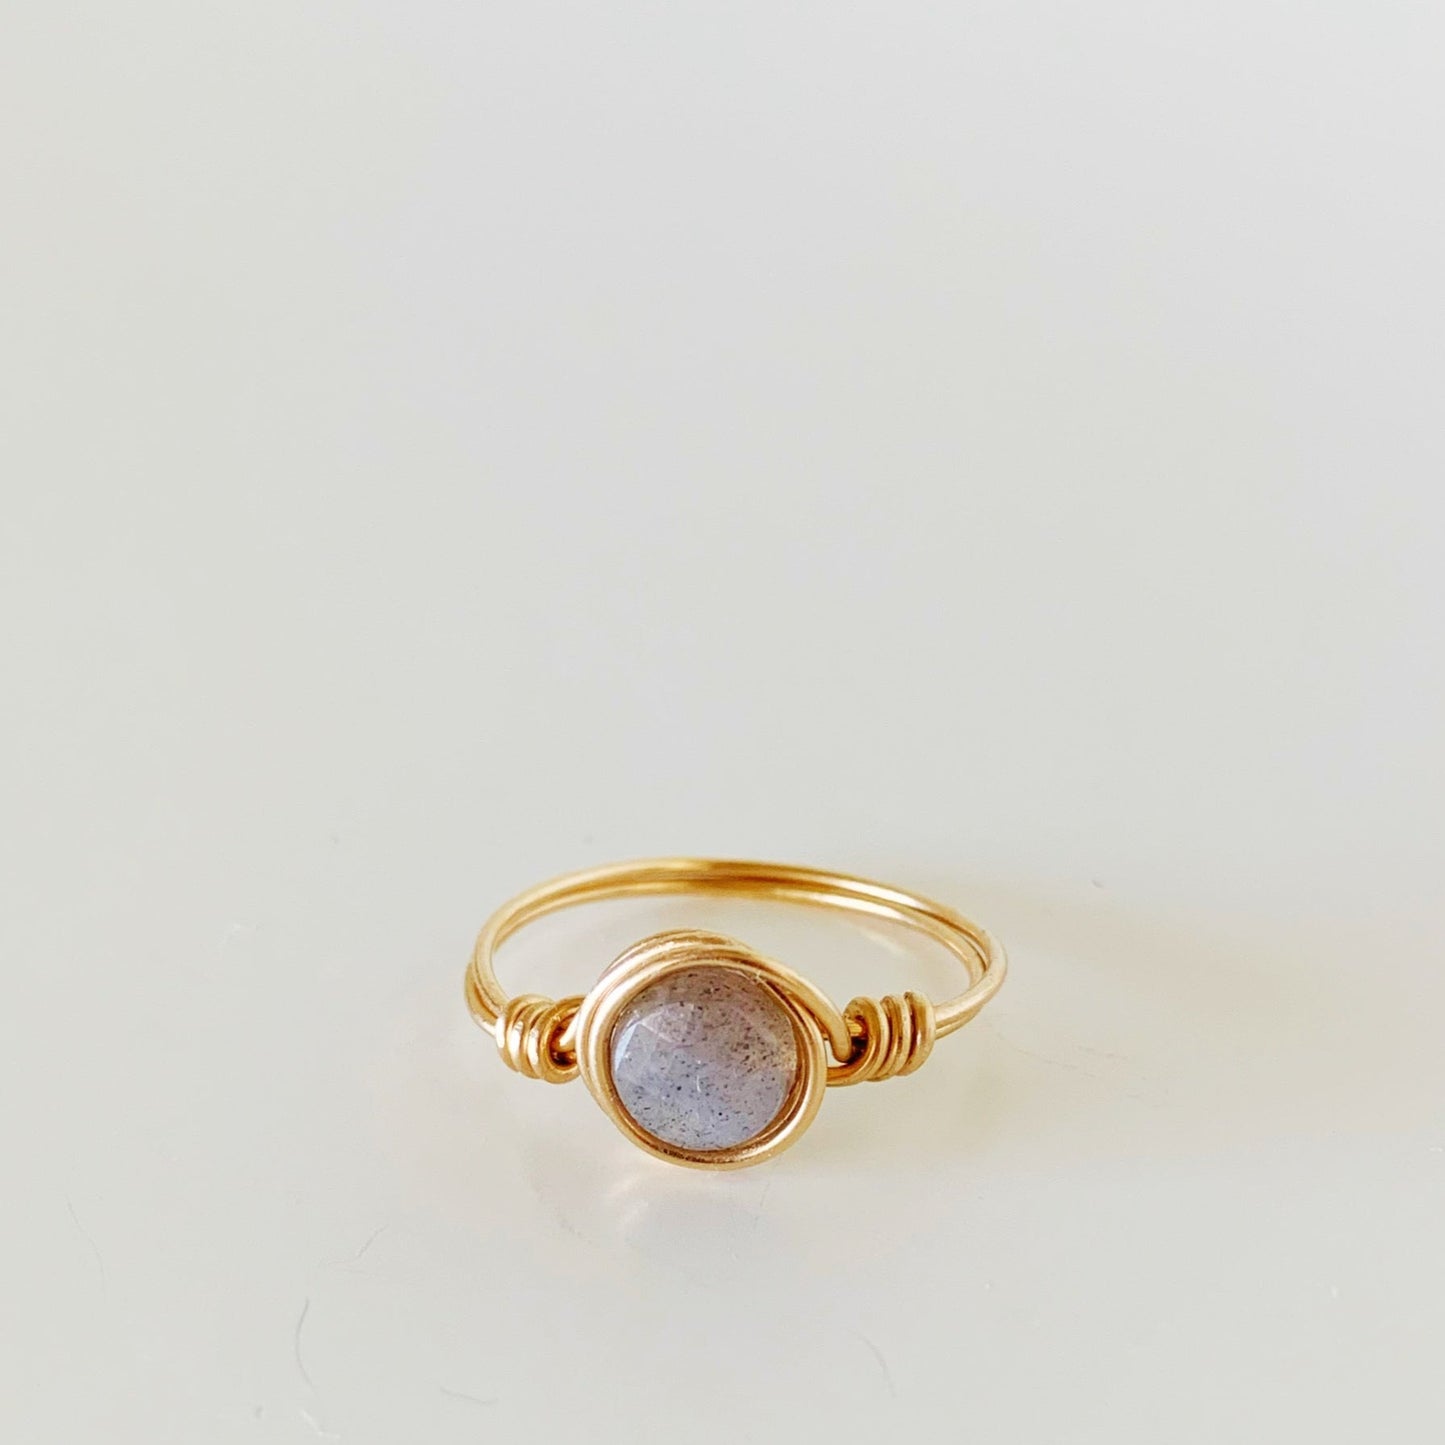 the arctic ring by mermaids and madeleines is a wire wrapped ring made with 14k gold filled wire and a faceted coin labradorite bead at the center. this ring is facing forwards and photographed on a white surface